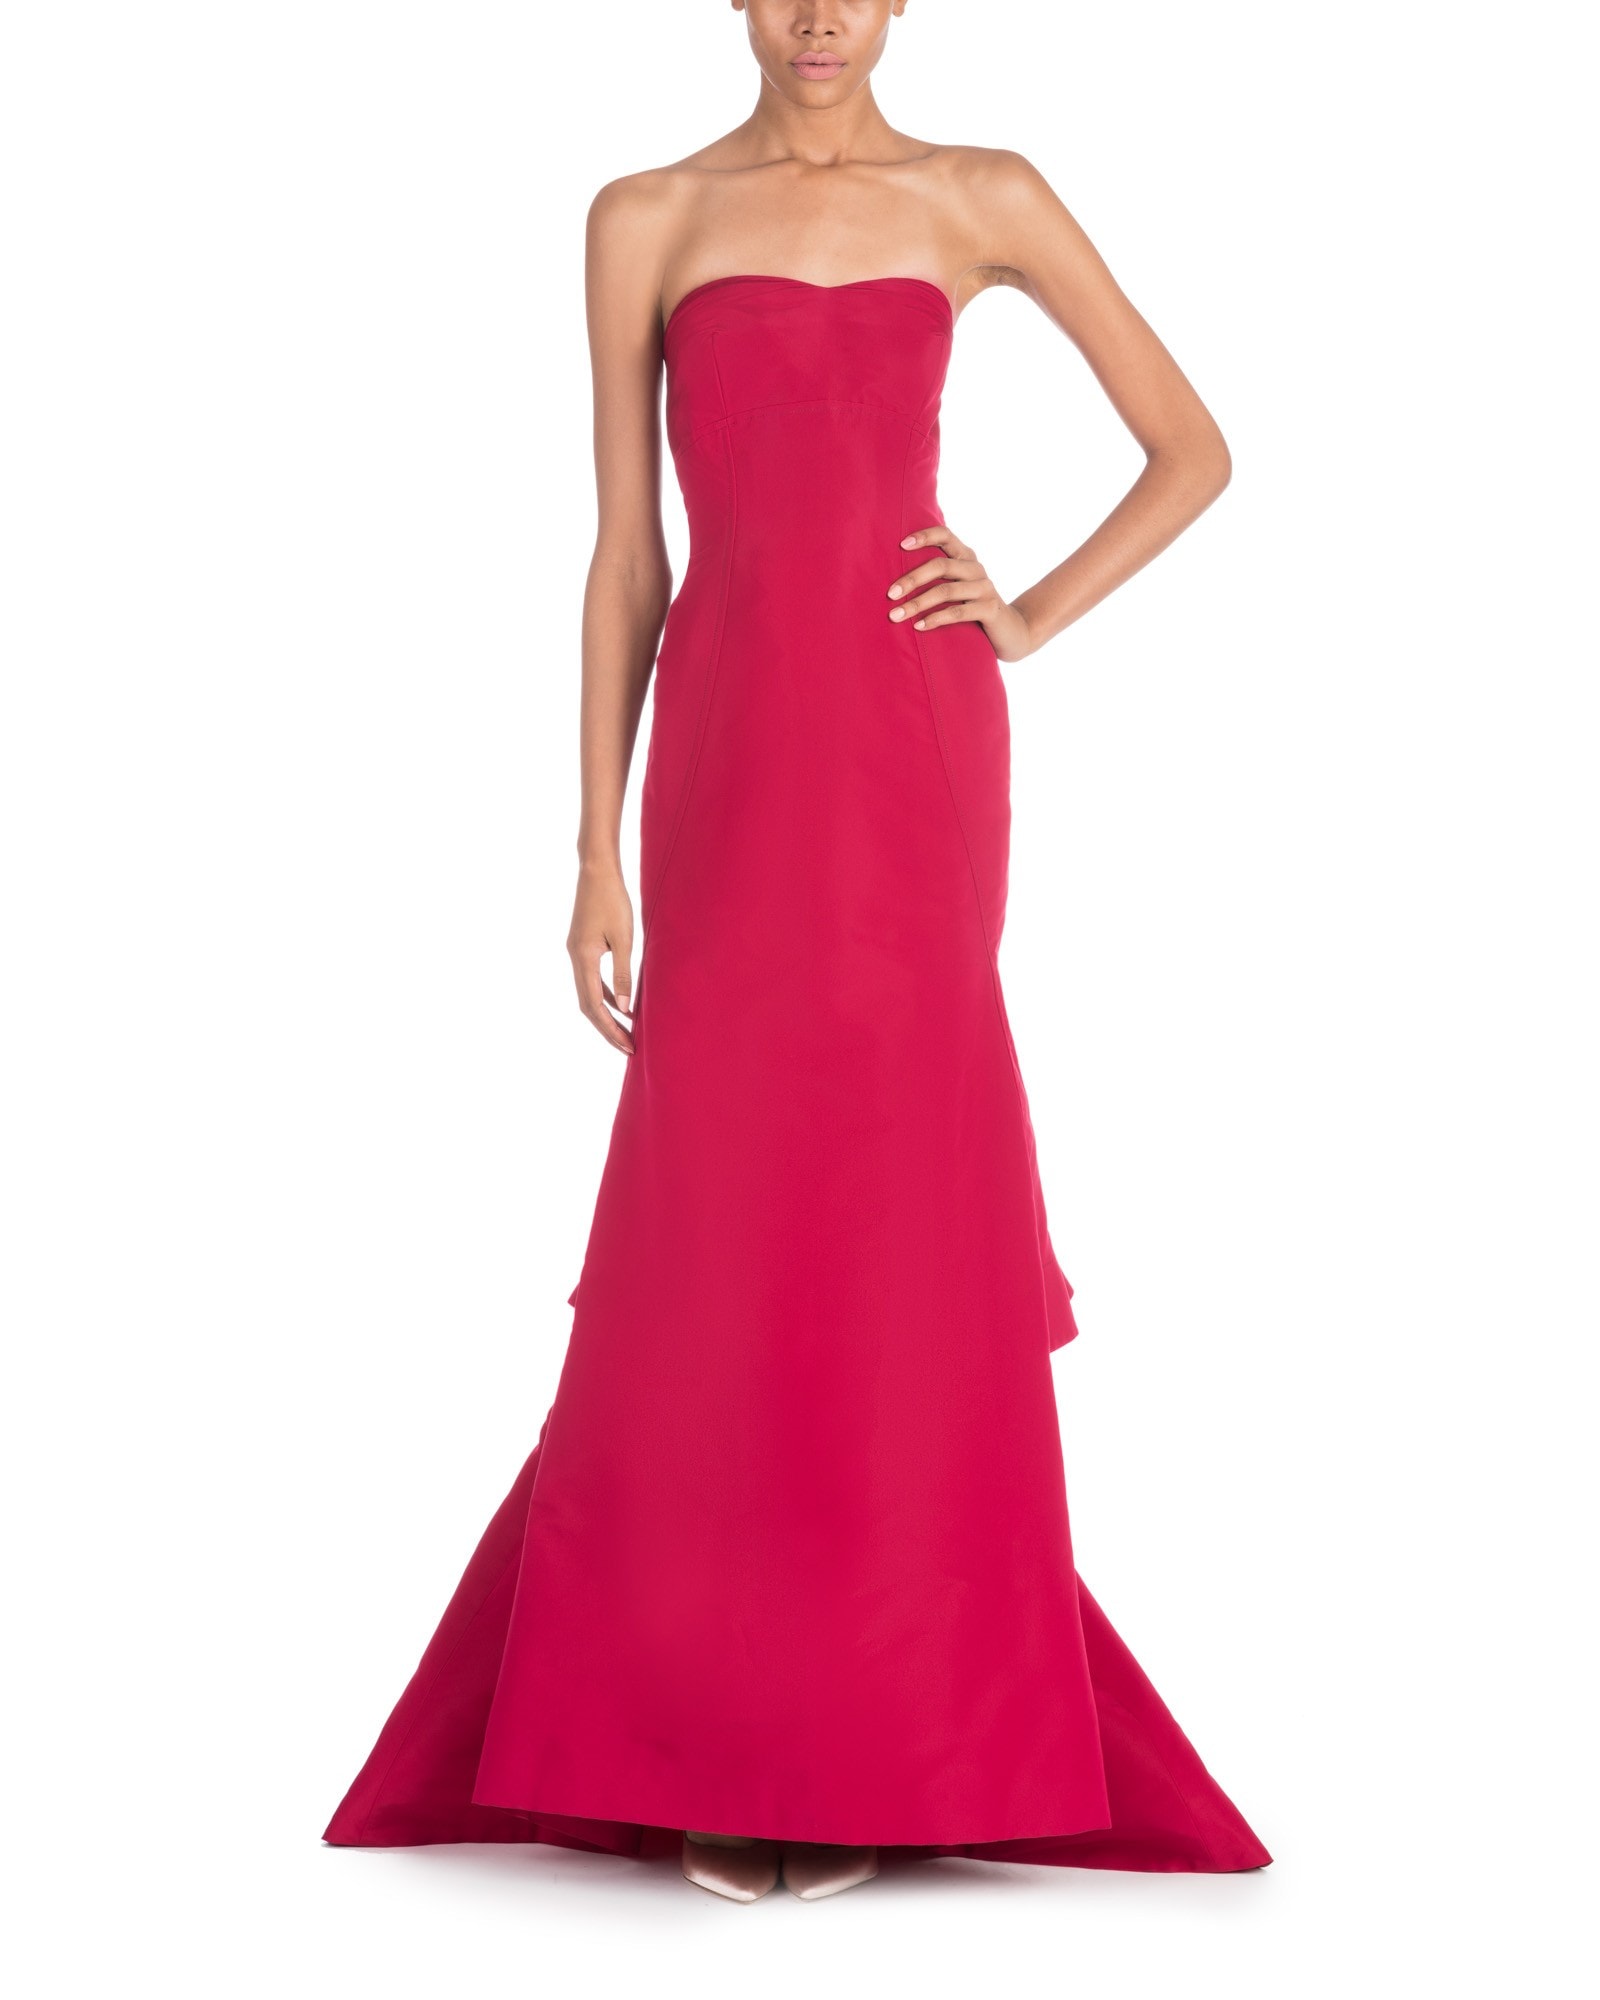 STRAPLESS RUFFLE BACK MERMAID GOWN